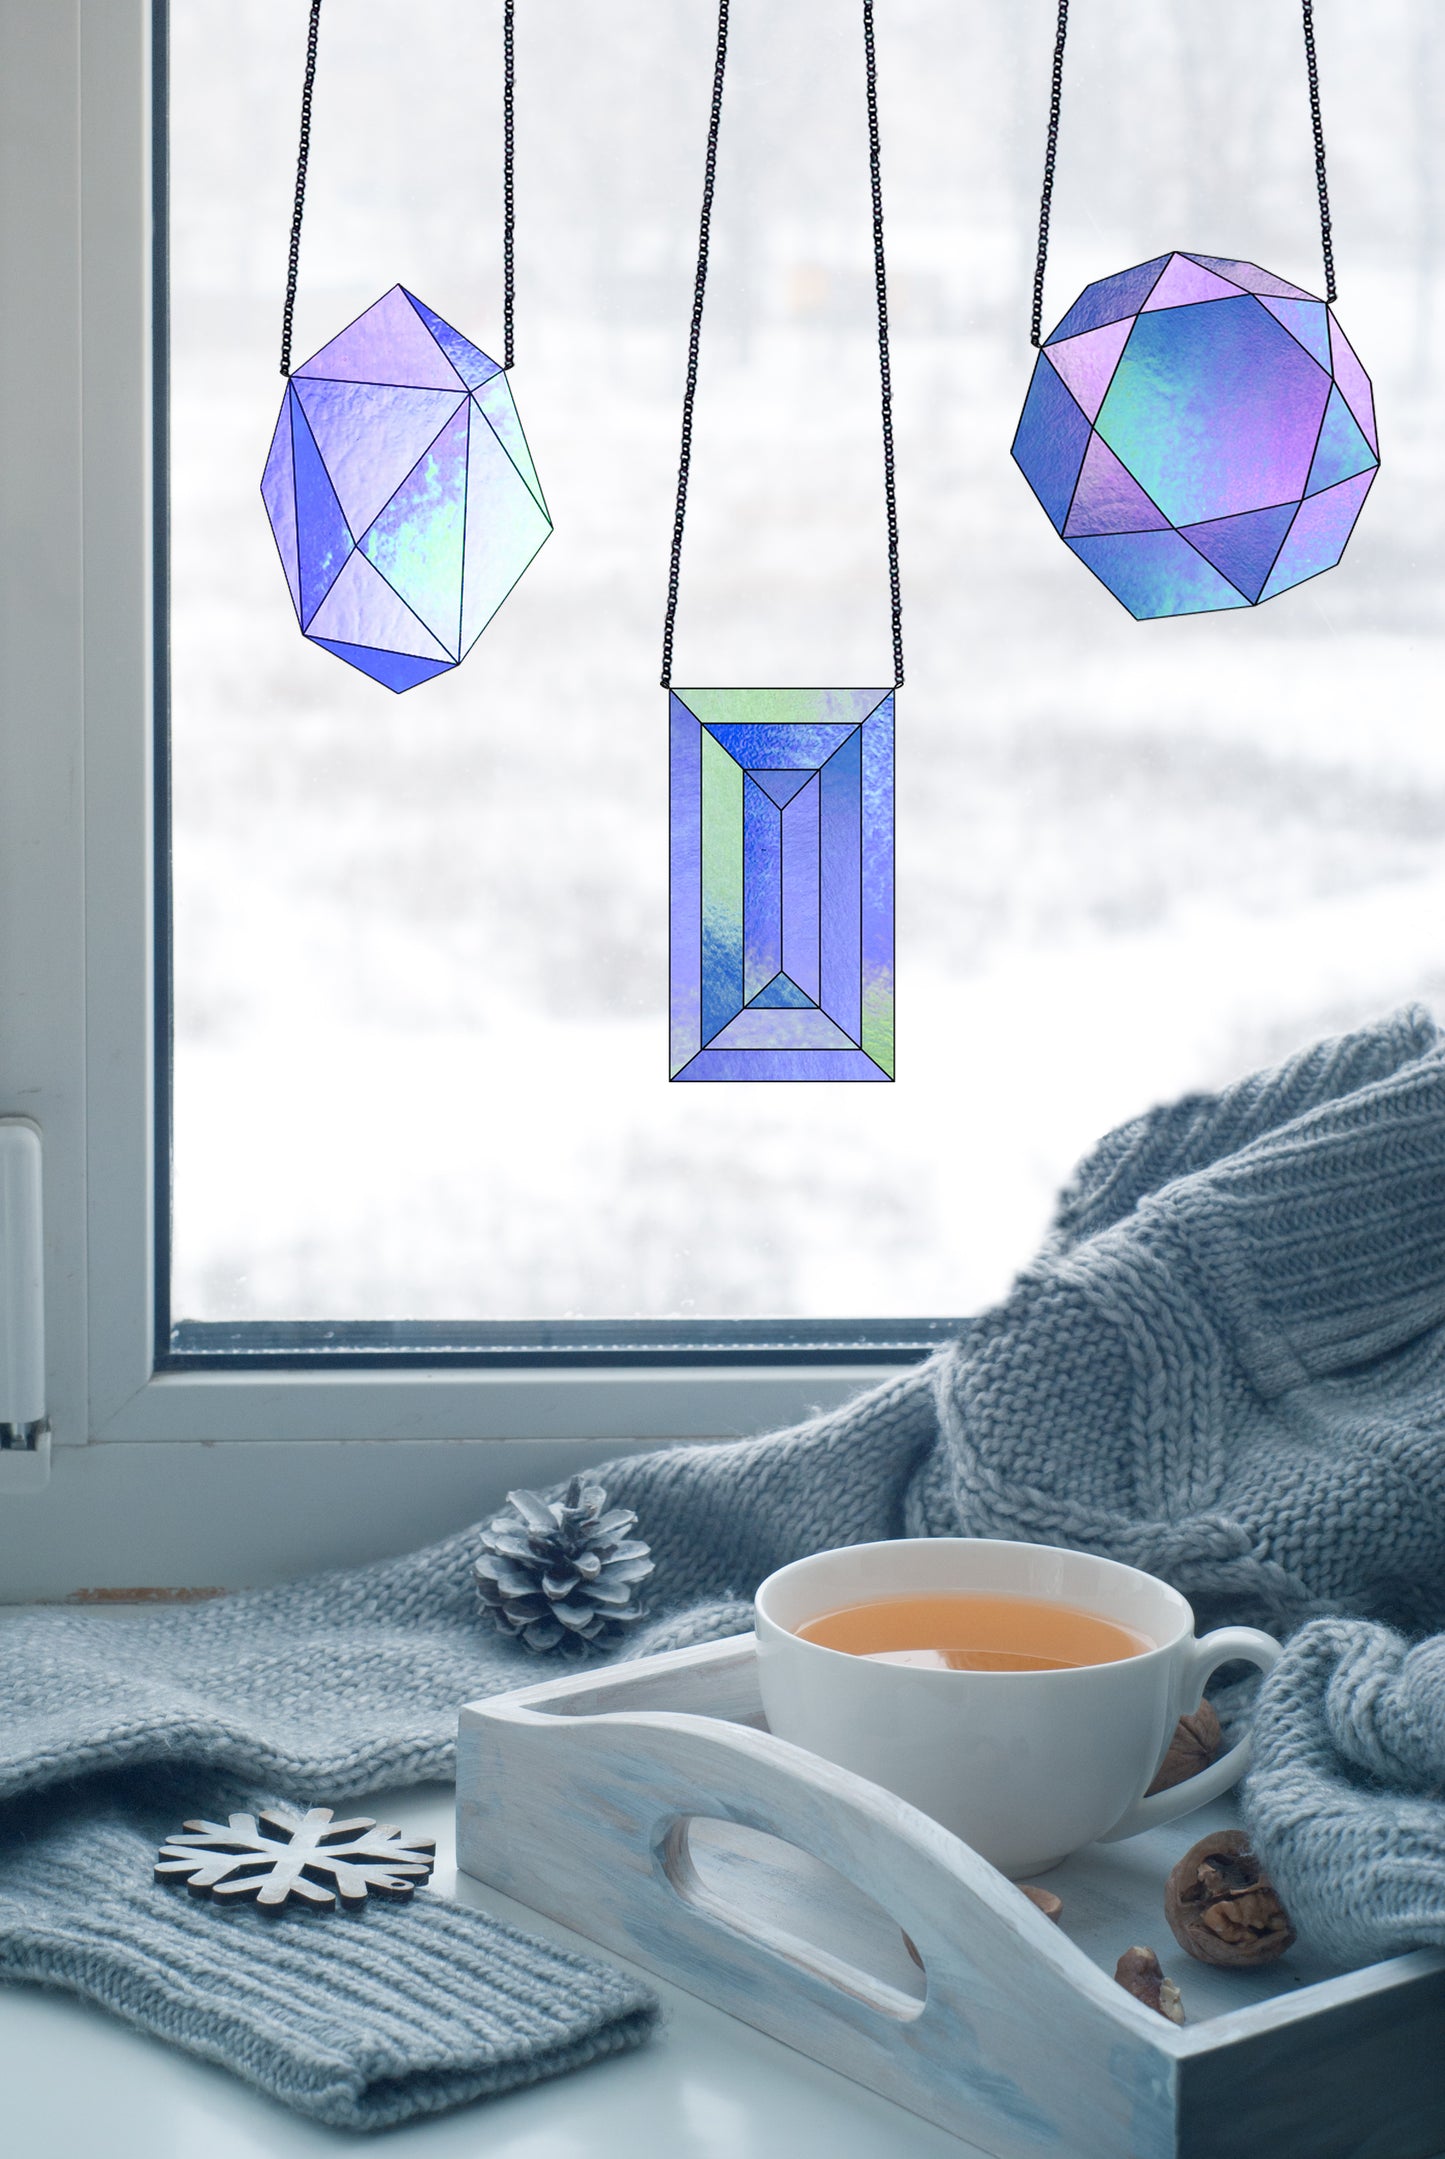 Geometric Faceted Gems Beginner Stained Glass Patterns Pack of 3